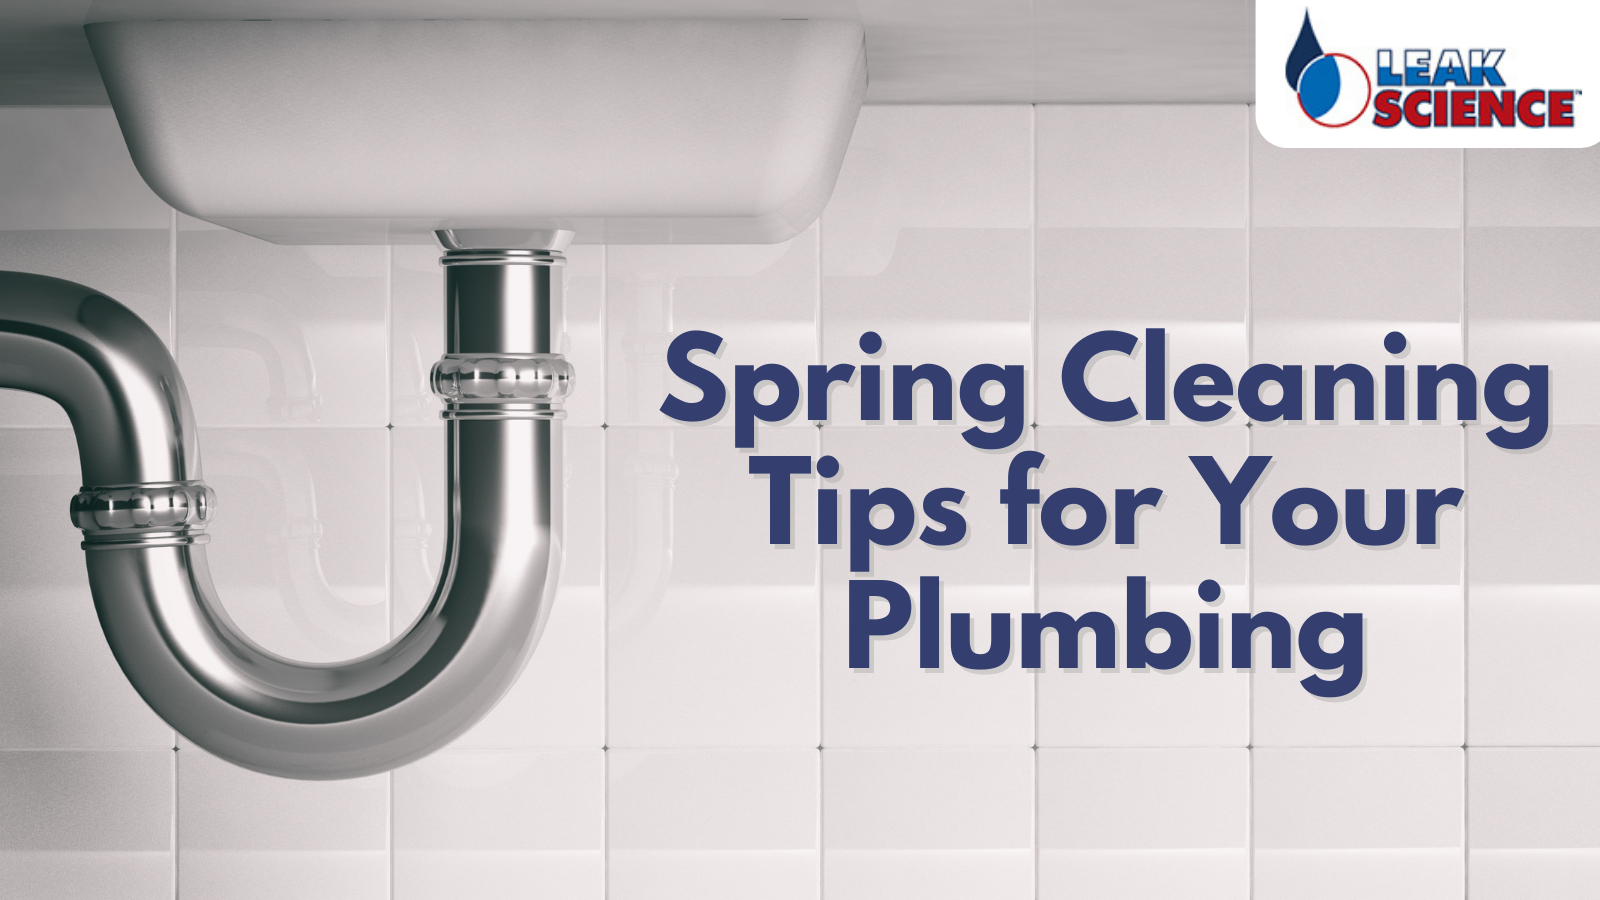 Spring Cleaning Tips for Your Plumbing